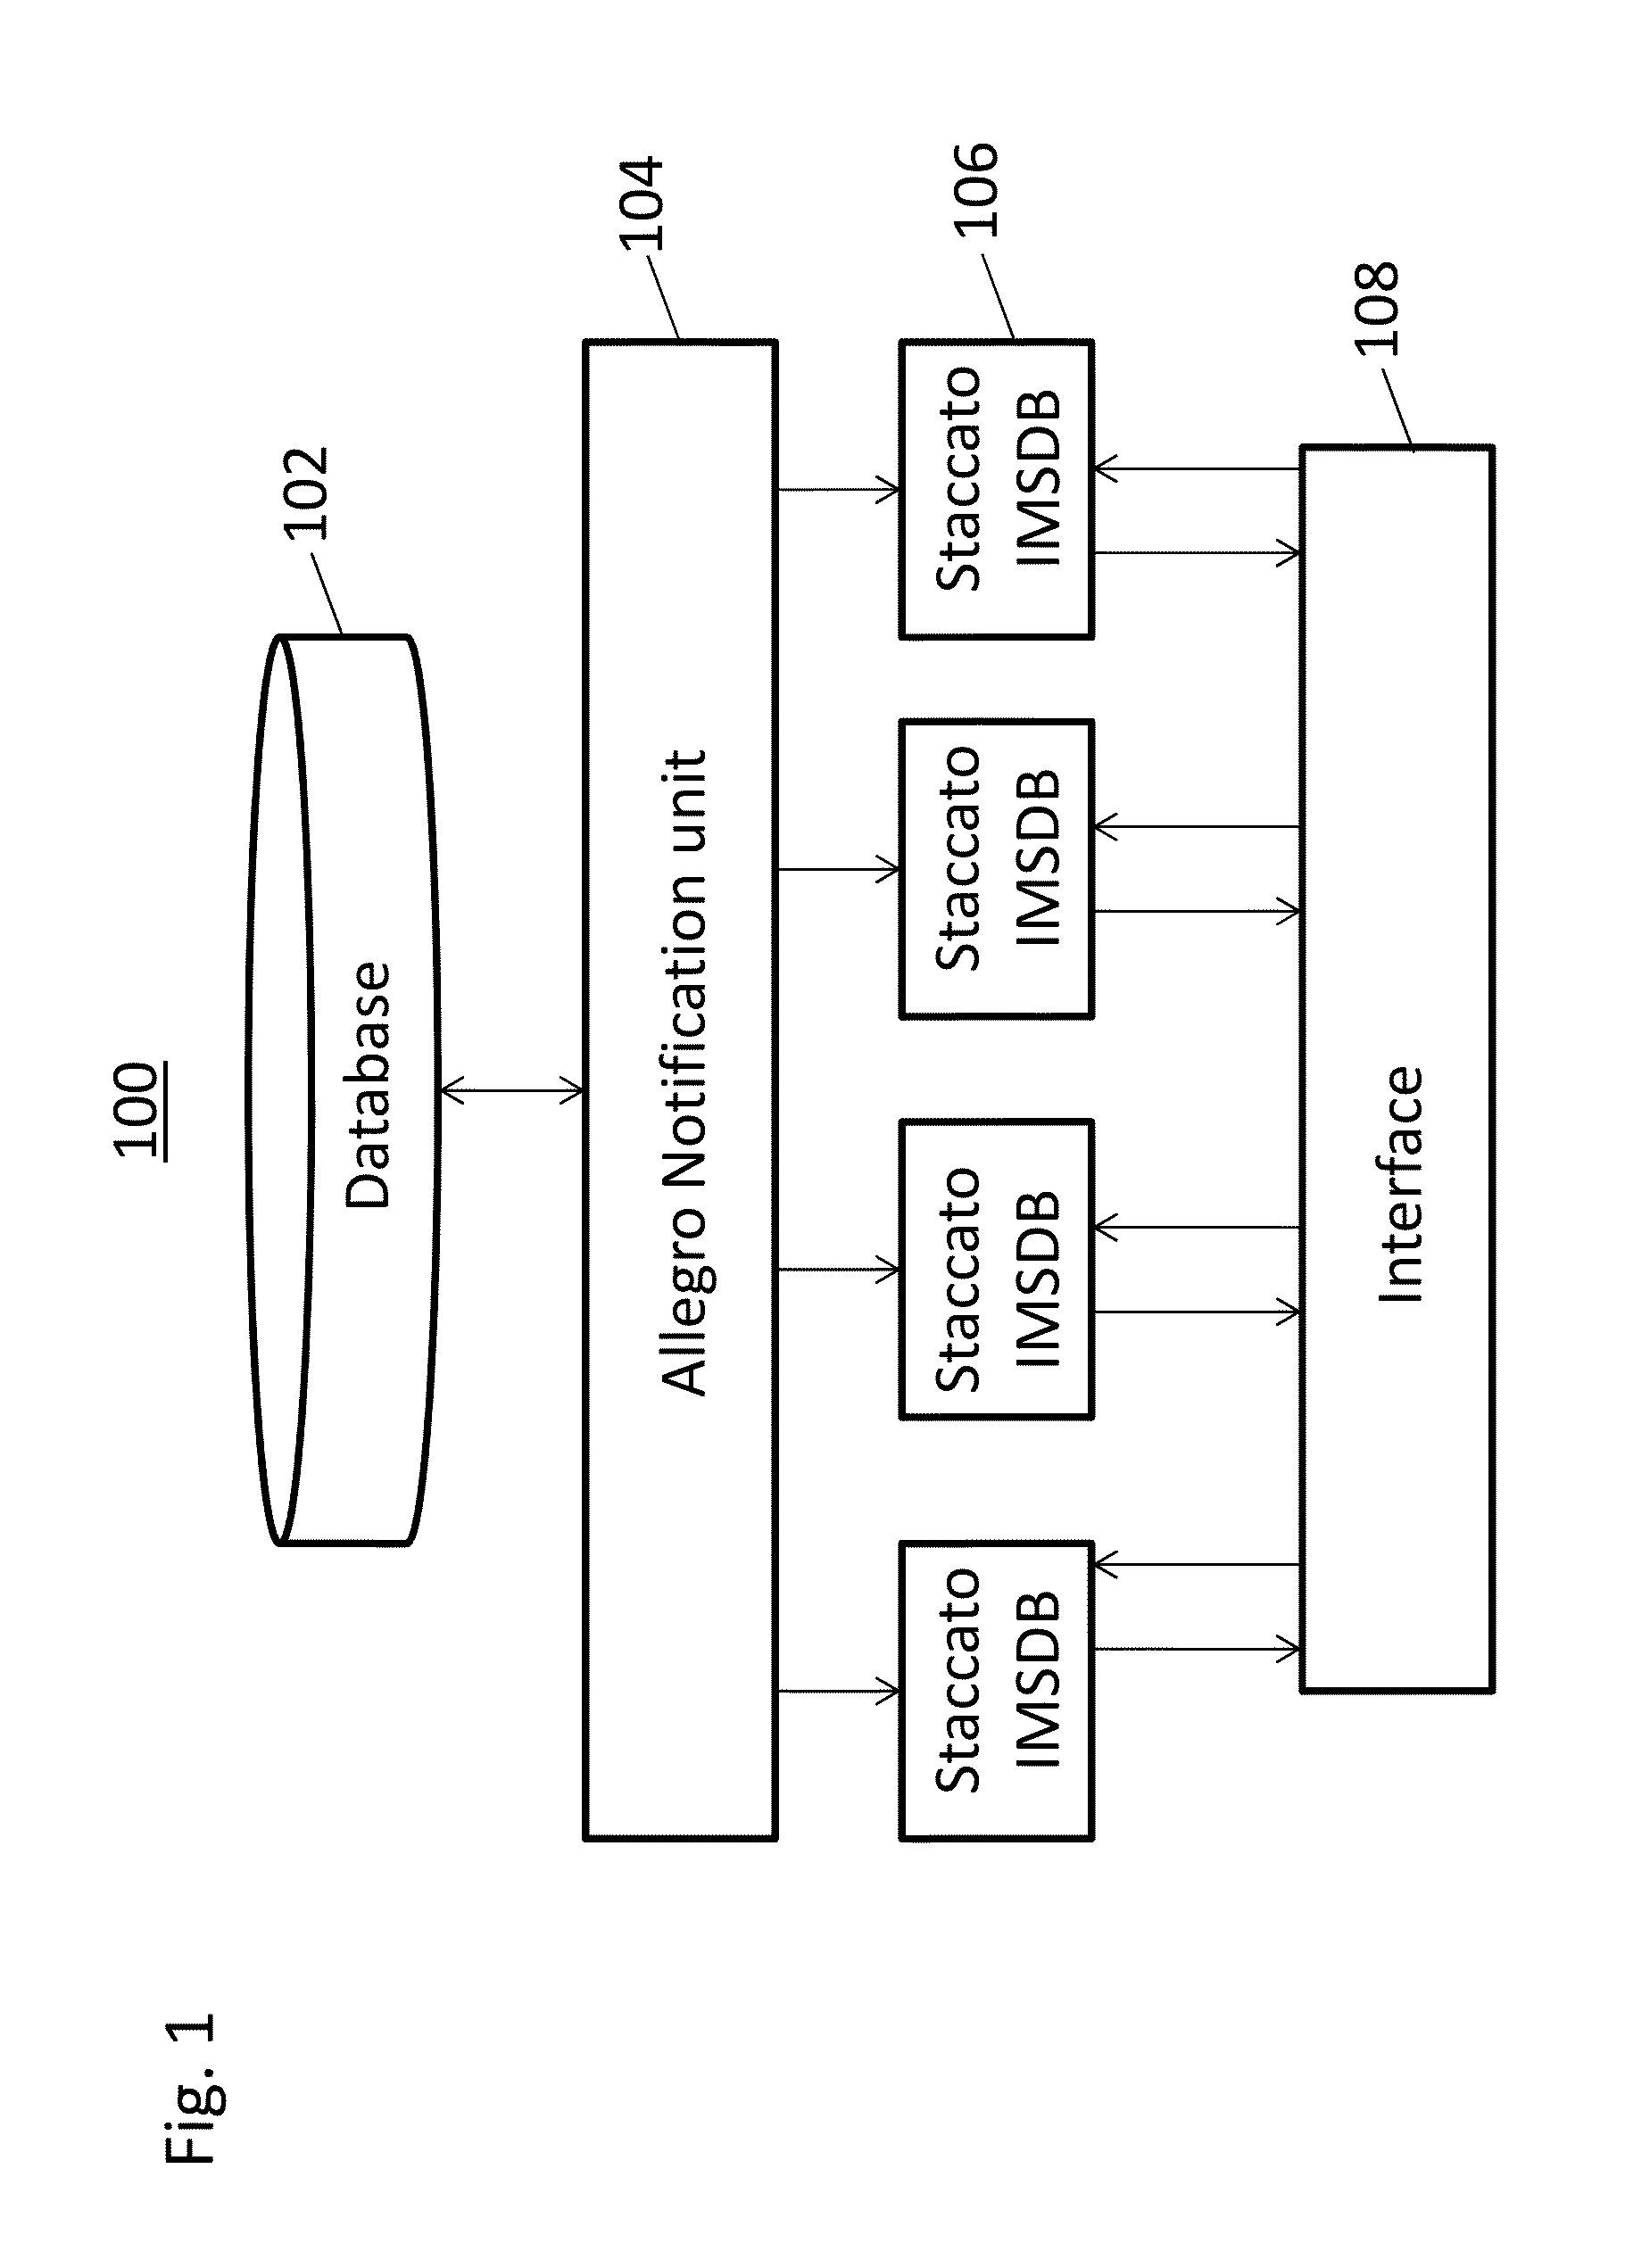 In-memory real-time synchronized database system and method